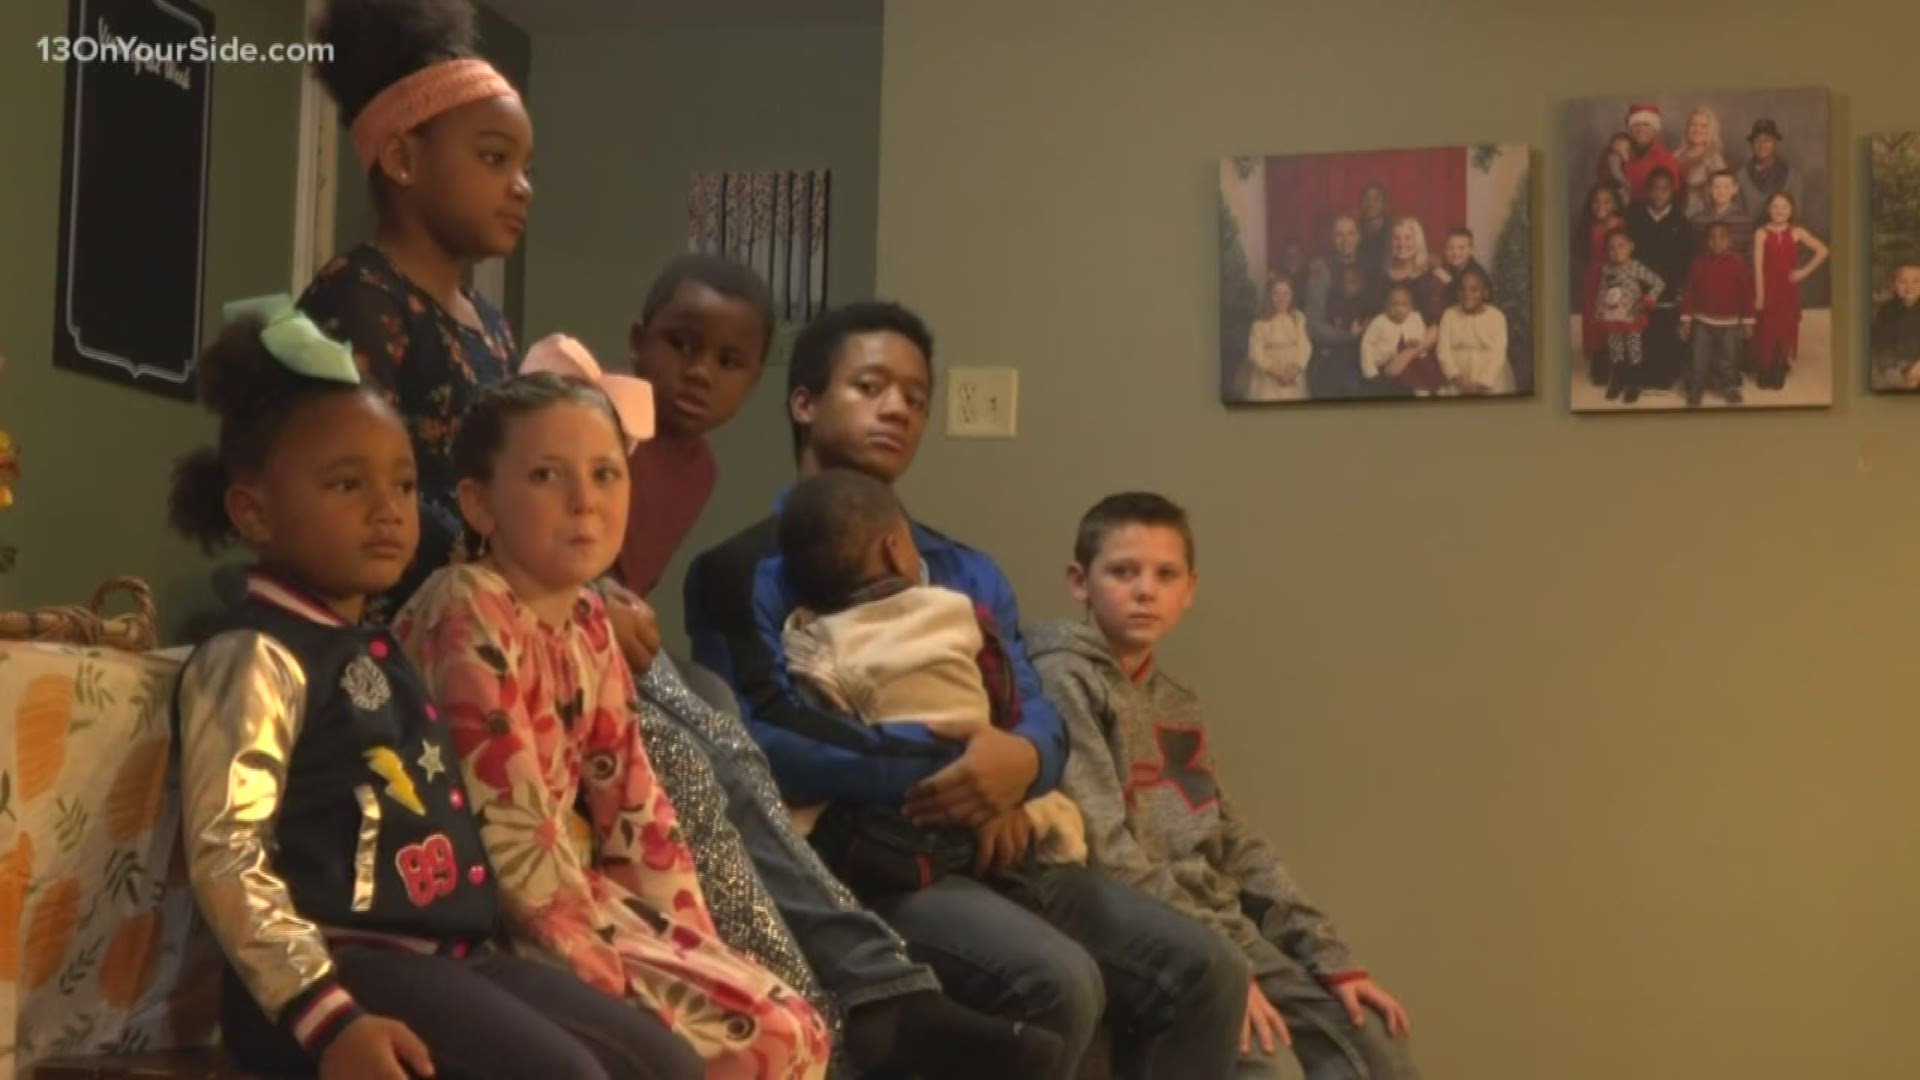 The family of four started their adoption journey in 2012. Since then, they have finalized the adoption of six siblings.